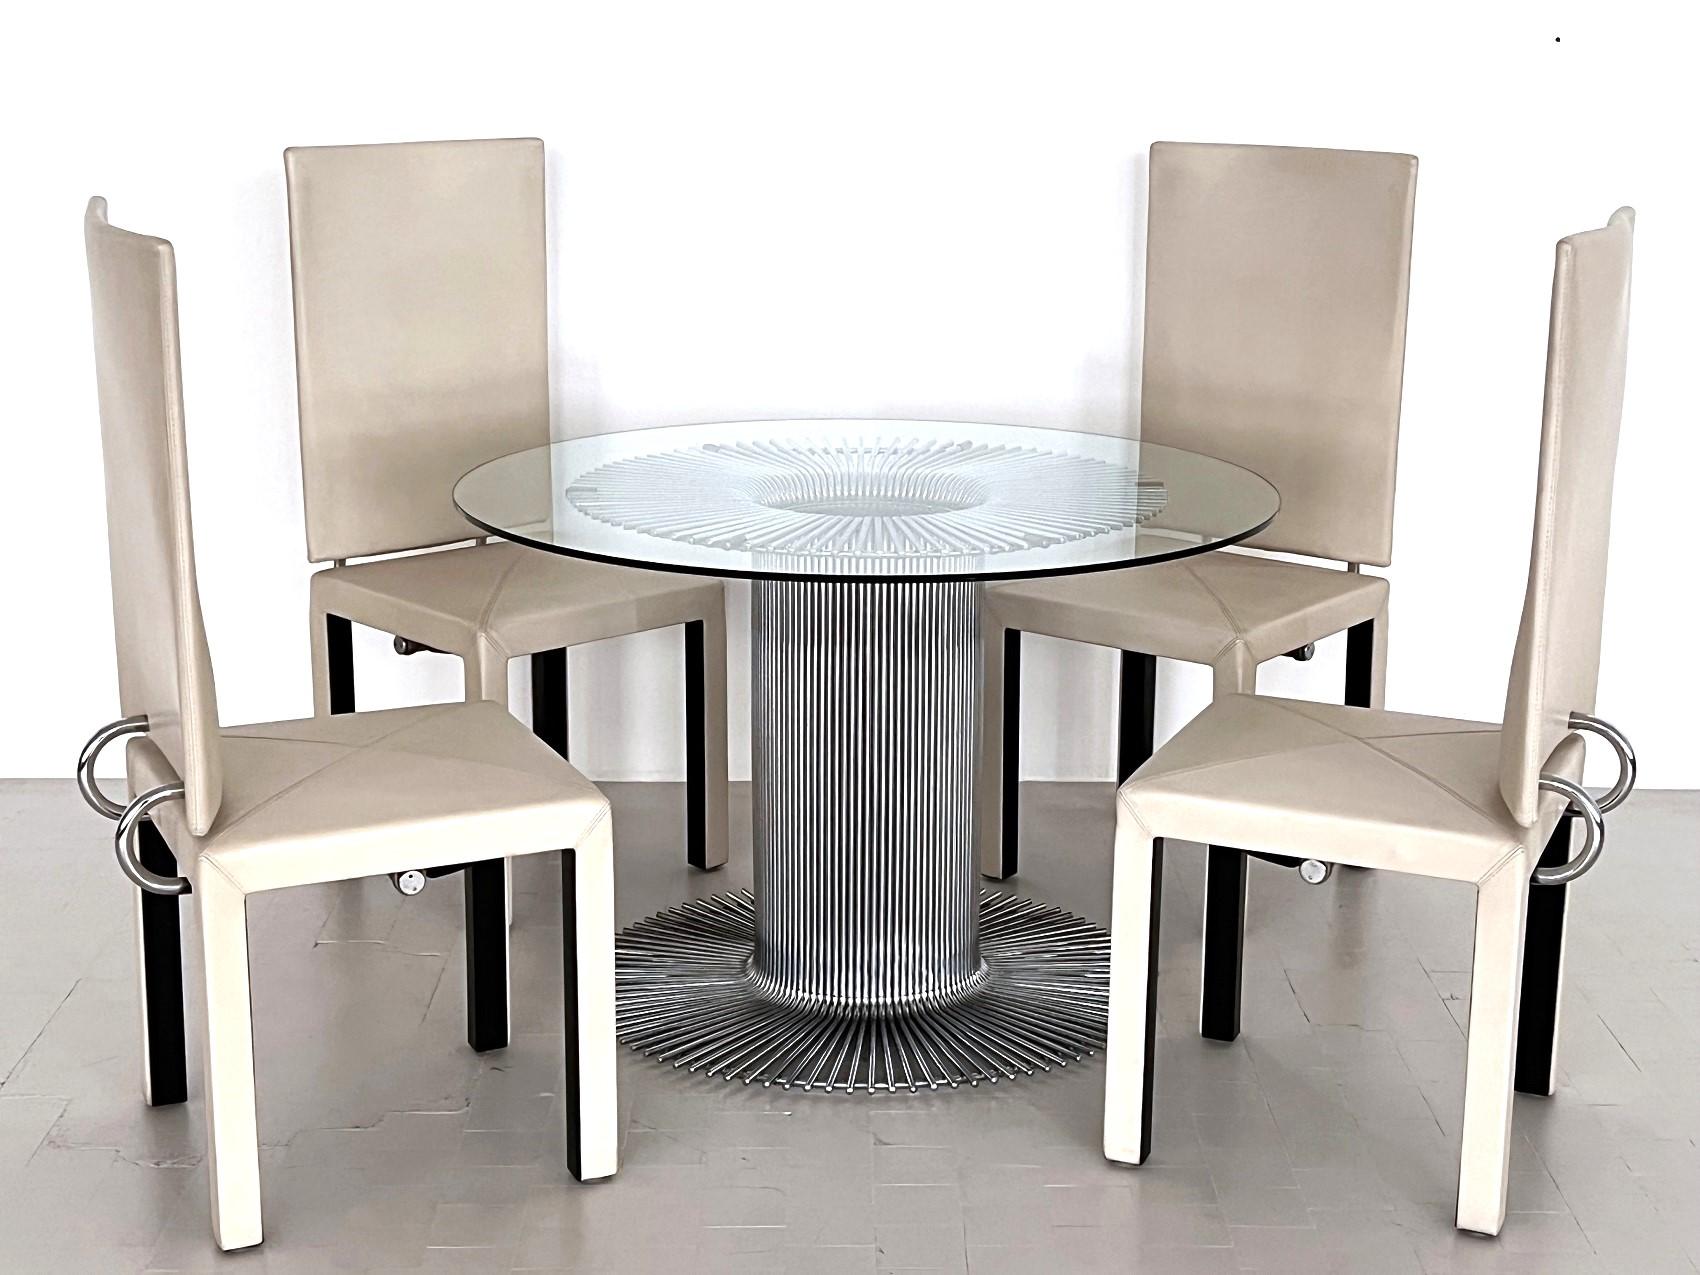 Beautiful round dining table made of chromed metal with glass top, designed by Gastone Rinaldi.
Made in Italy,  ca. 1960s

Pedestal dining table with a sculptural tubular chrome base and clear glass top. 
Designed and Made in Italy. 
Particular